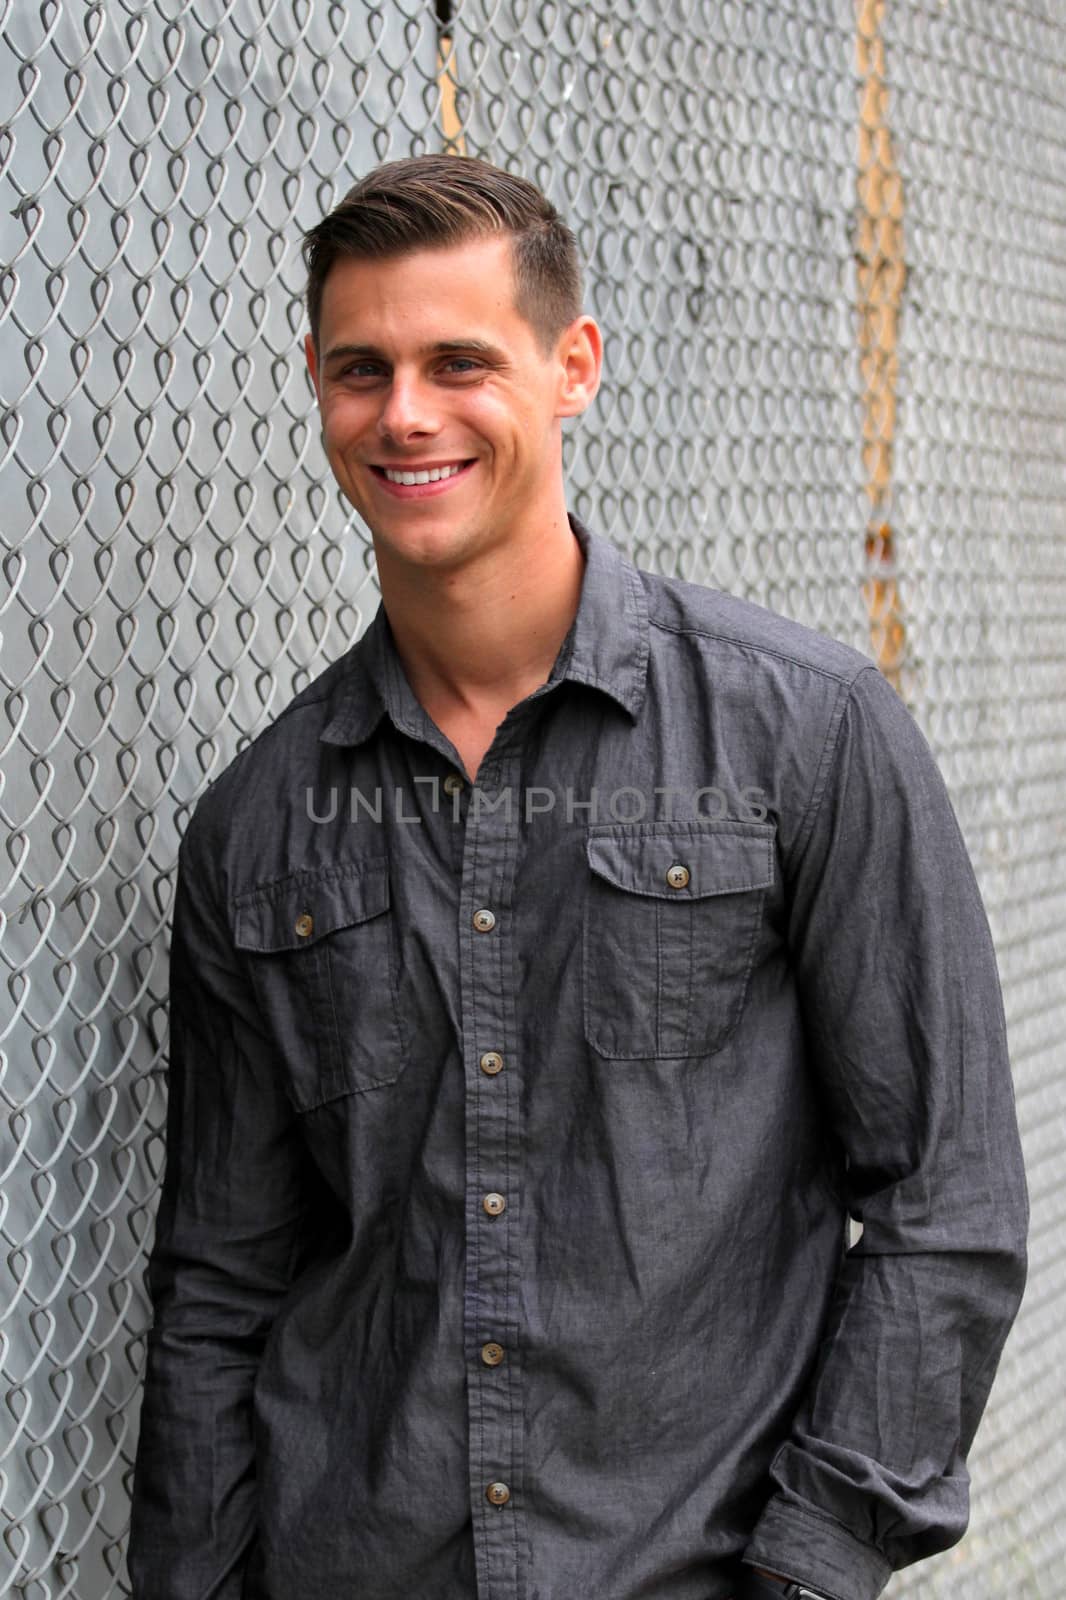 Portrait of a man standing in front of a chain link fence.